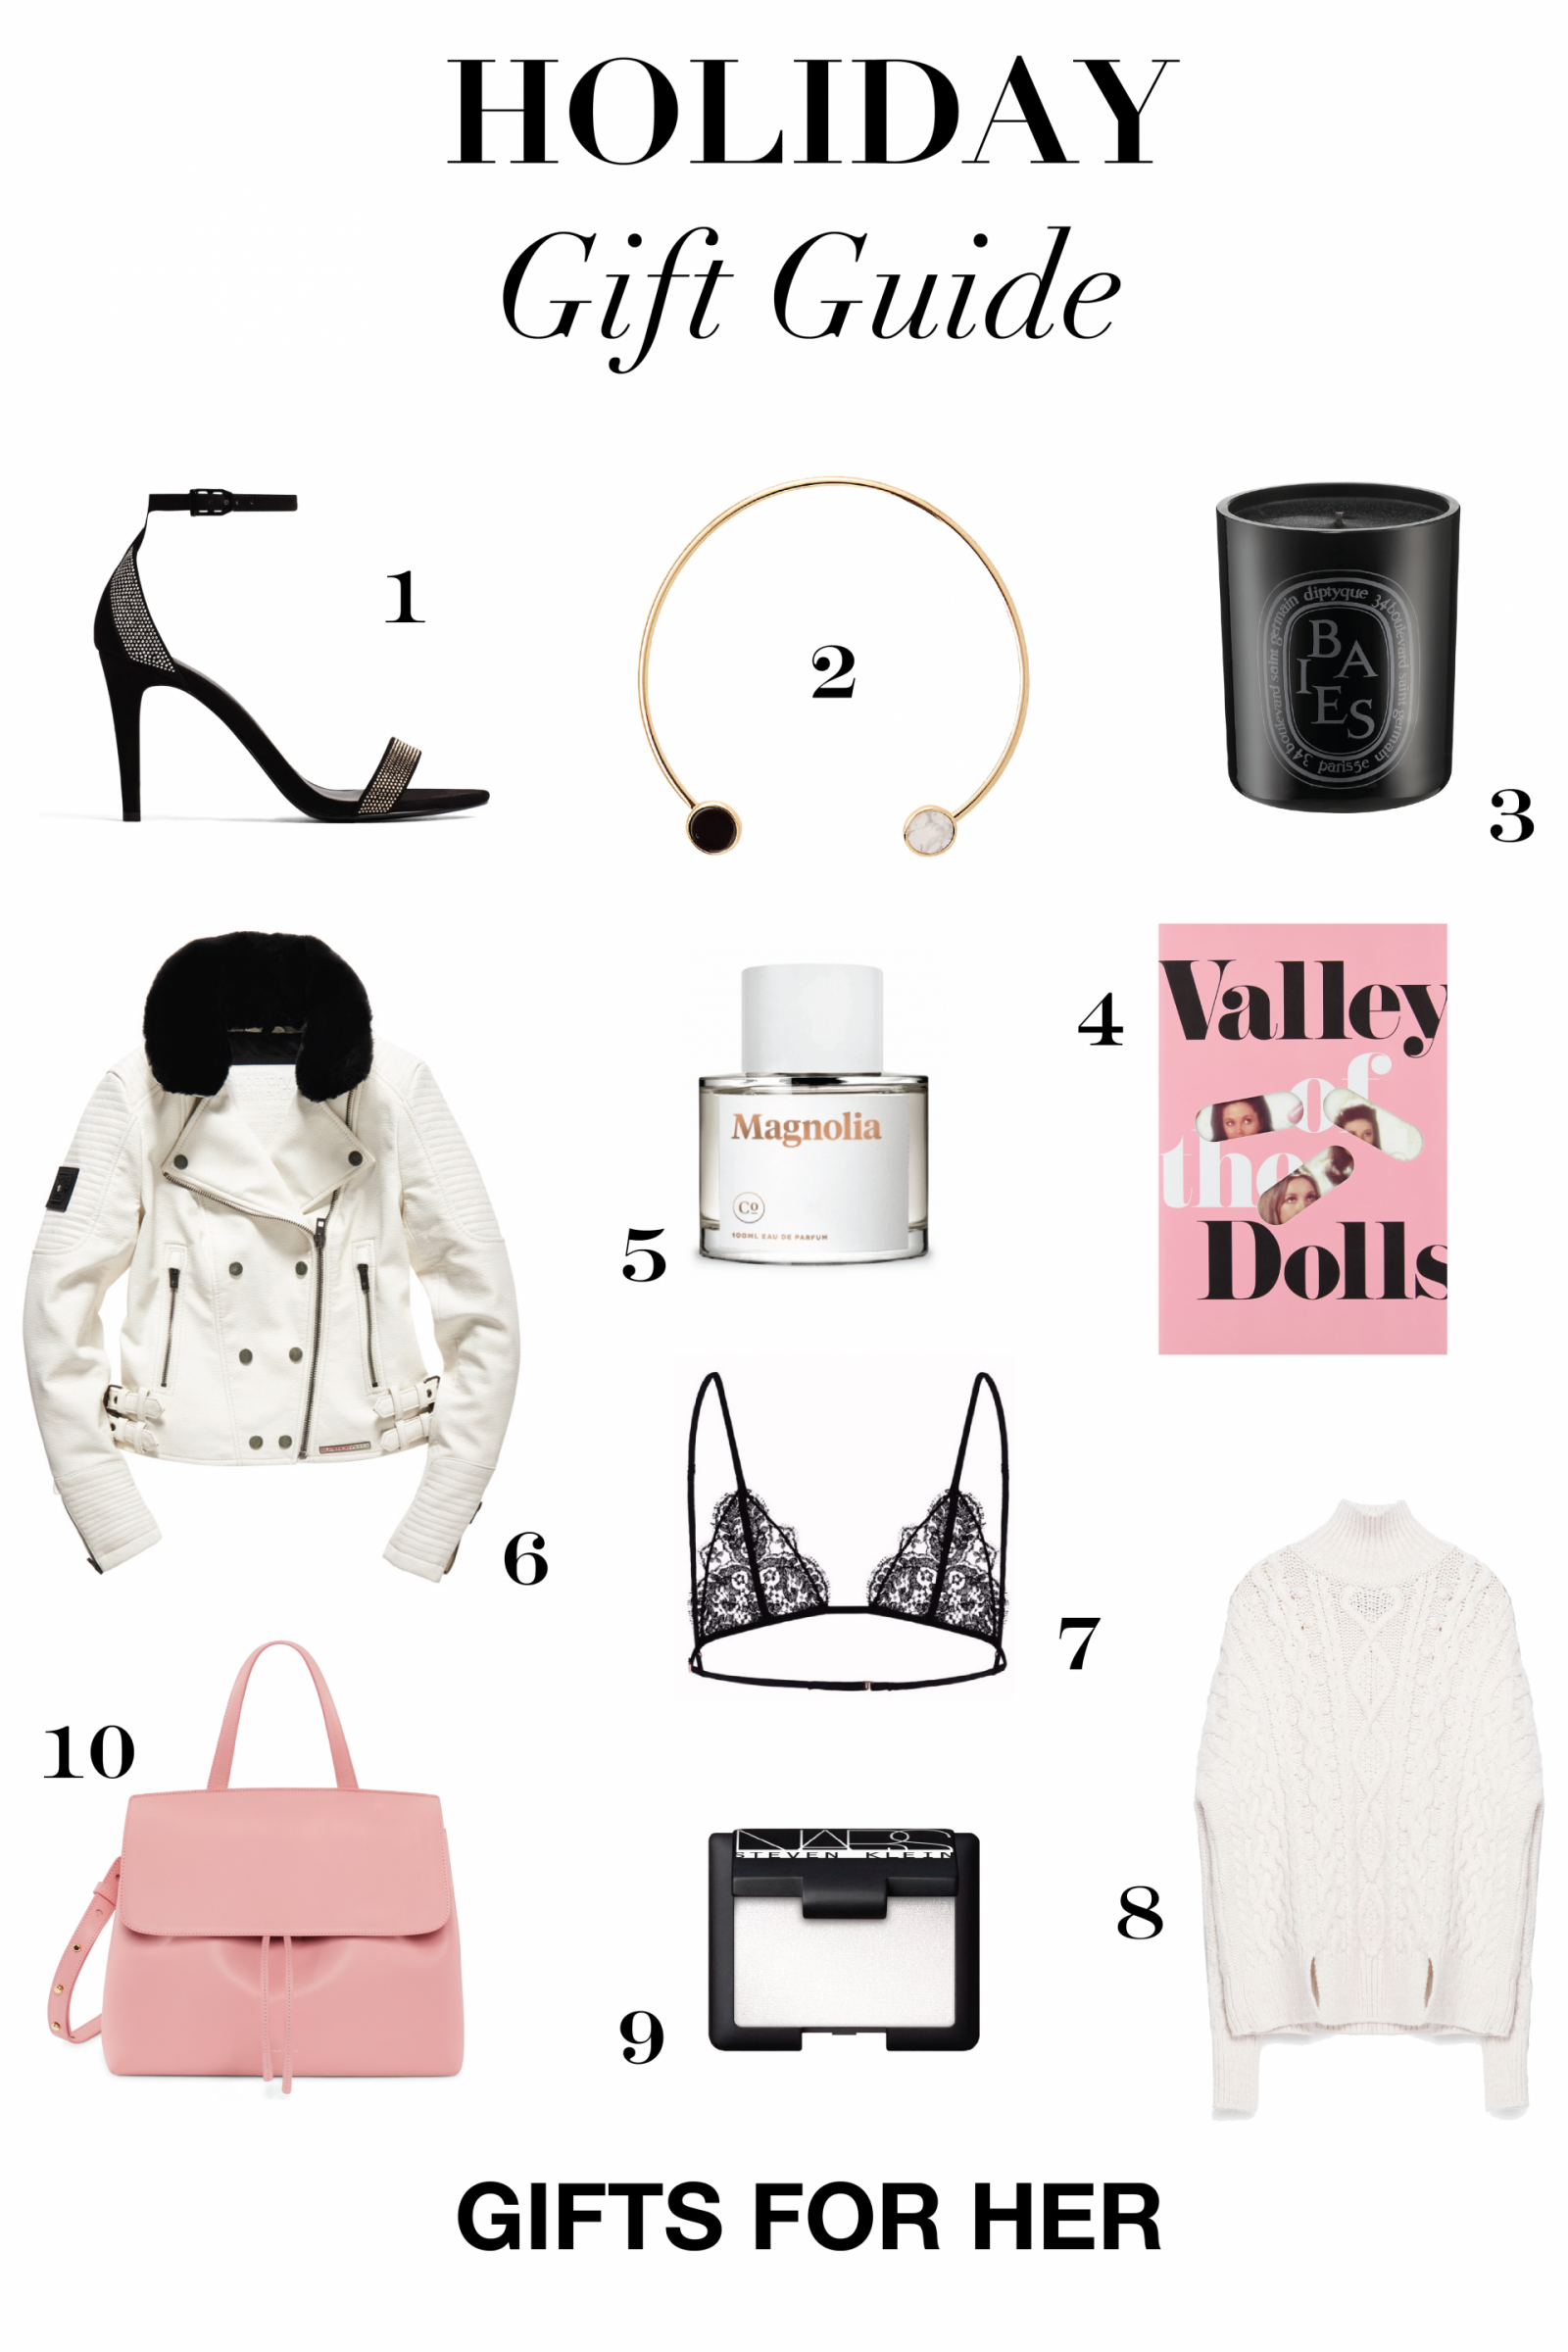 10 Gifts For Her